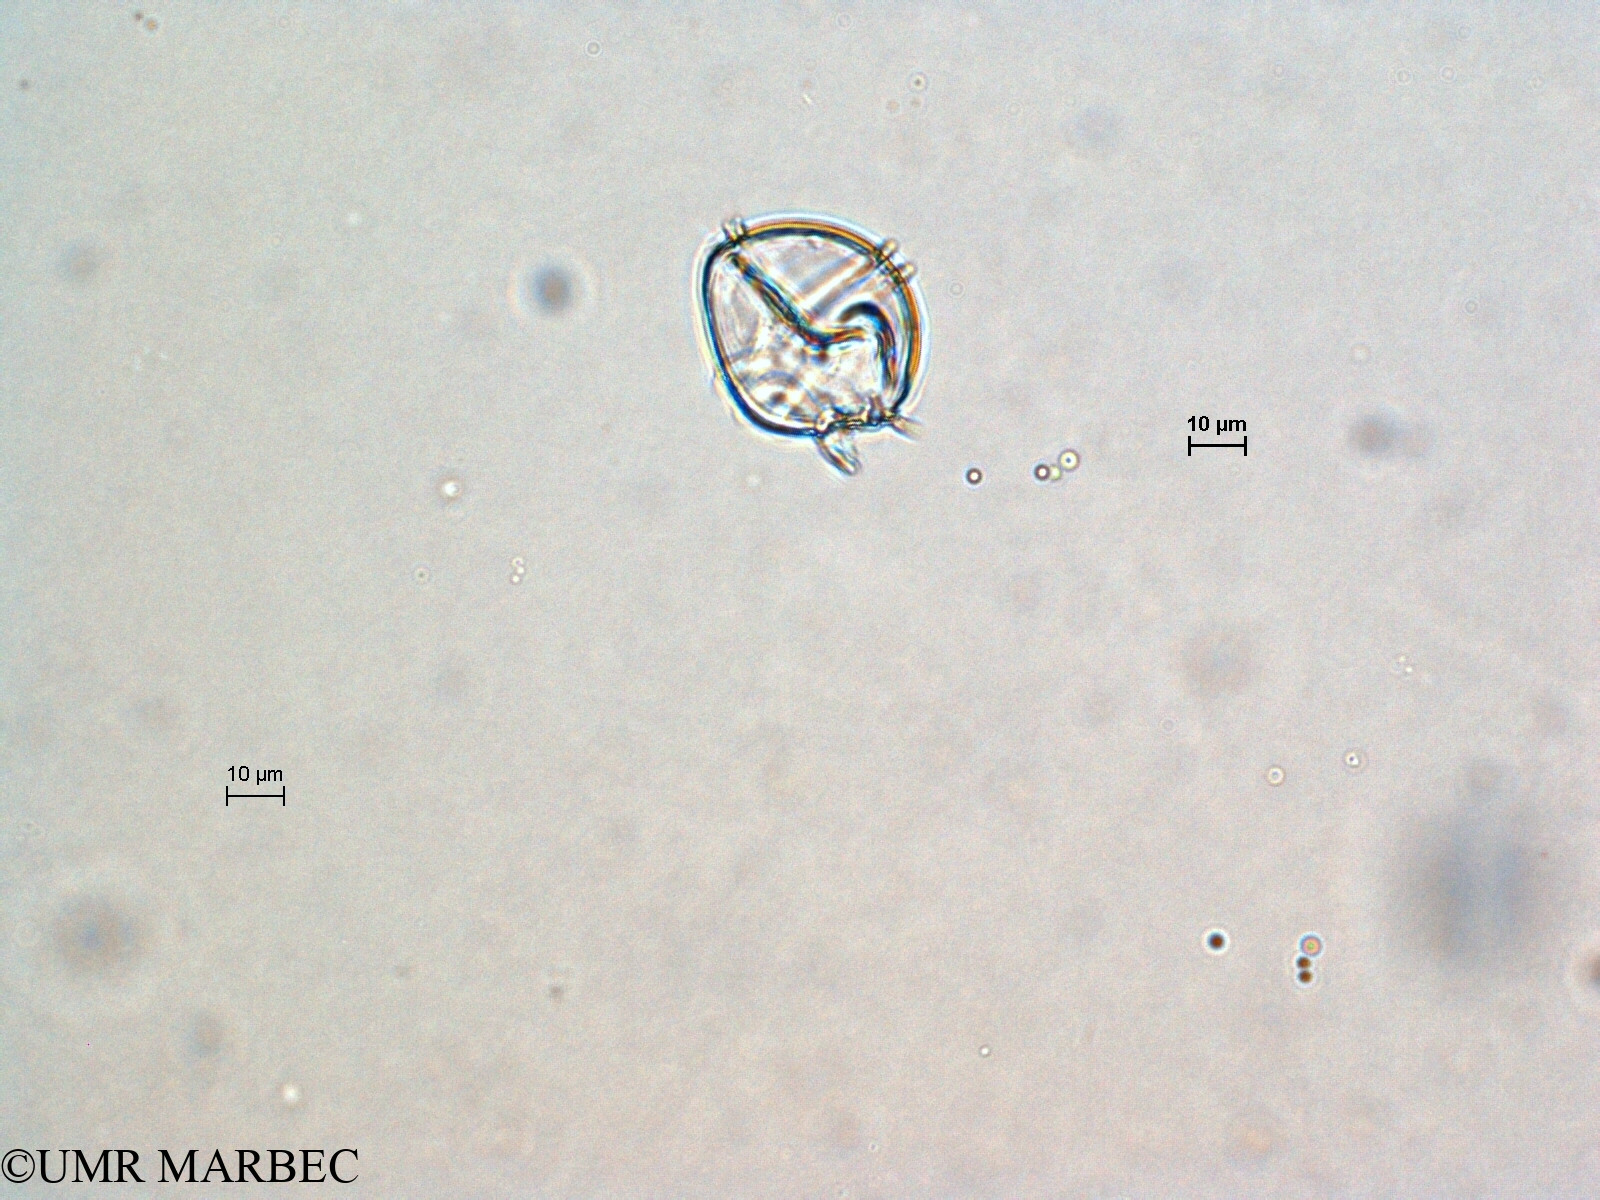 phyto/Scattered_Islands/all/COMMA April 2011/Protoperidinium sp8 (recomposé)(copy).jpg